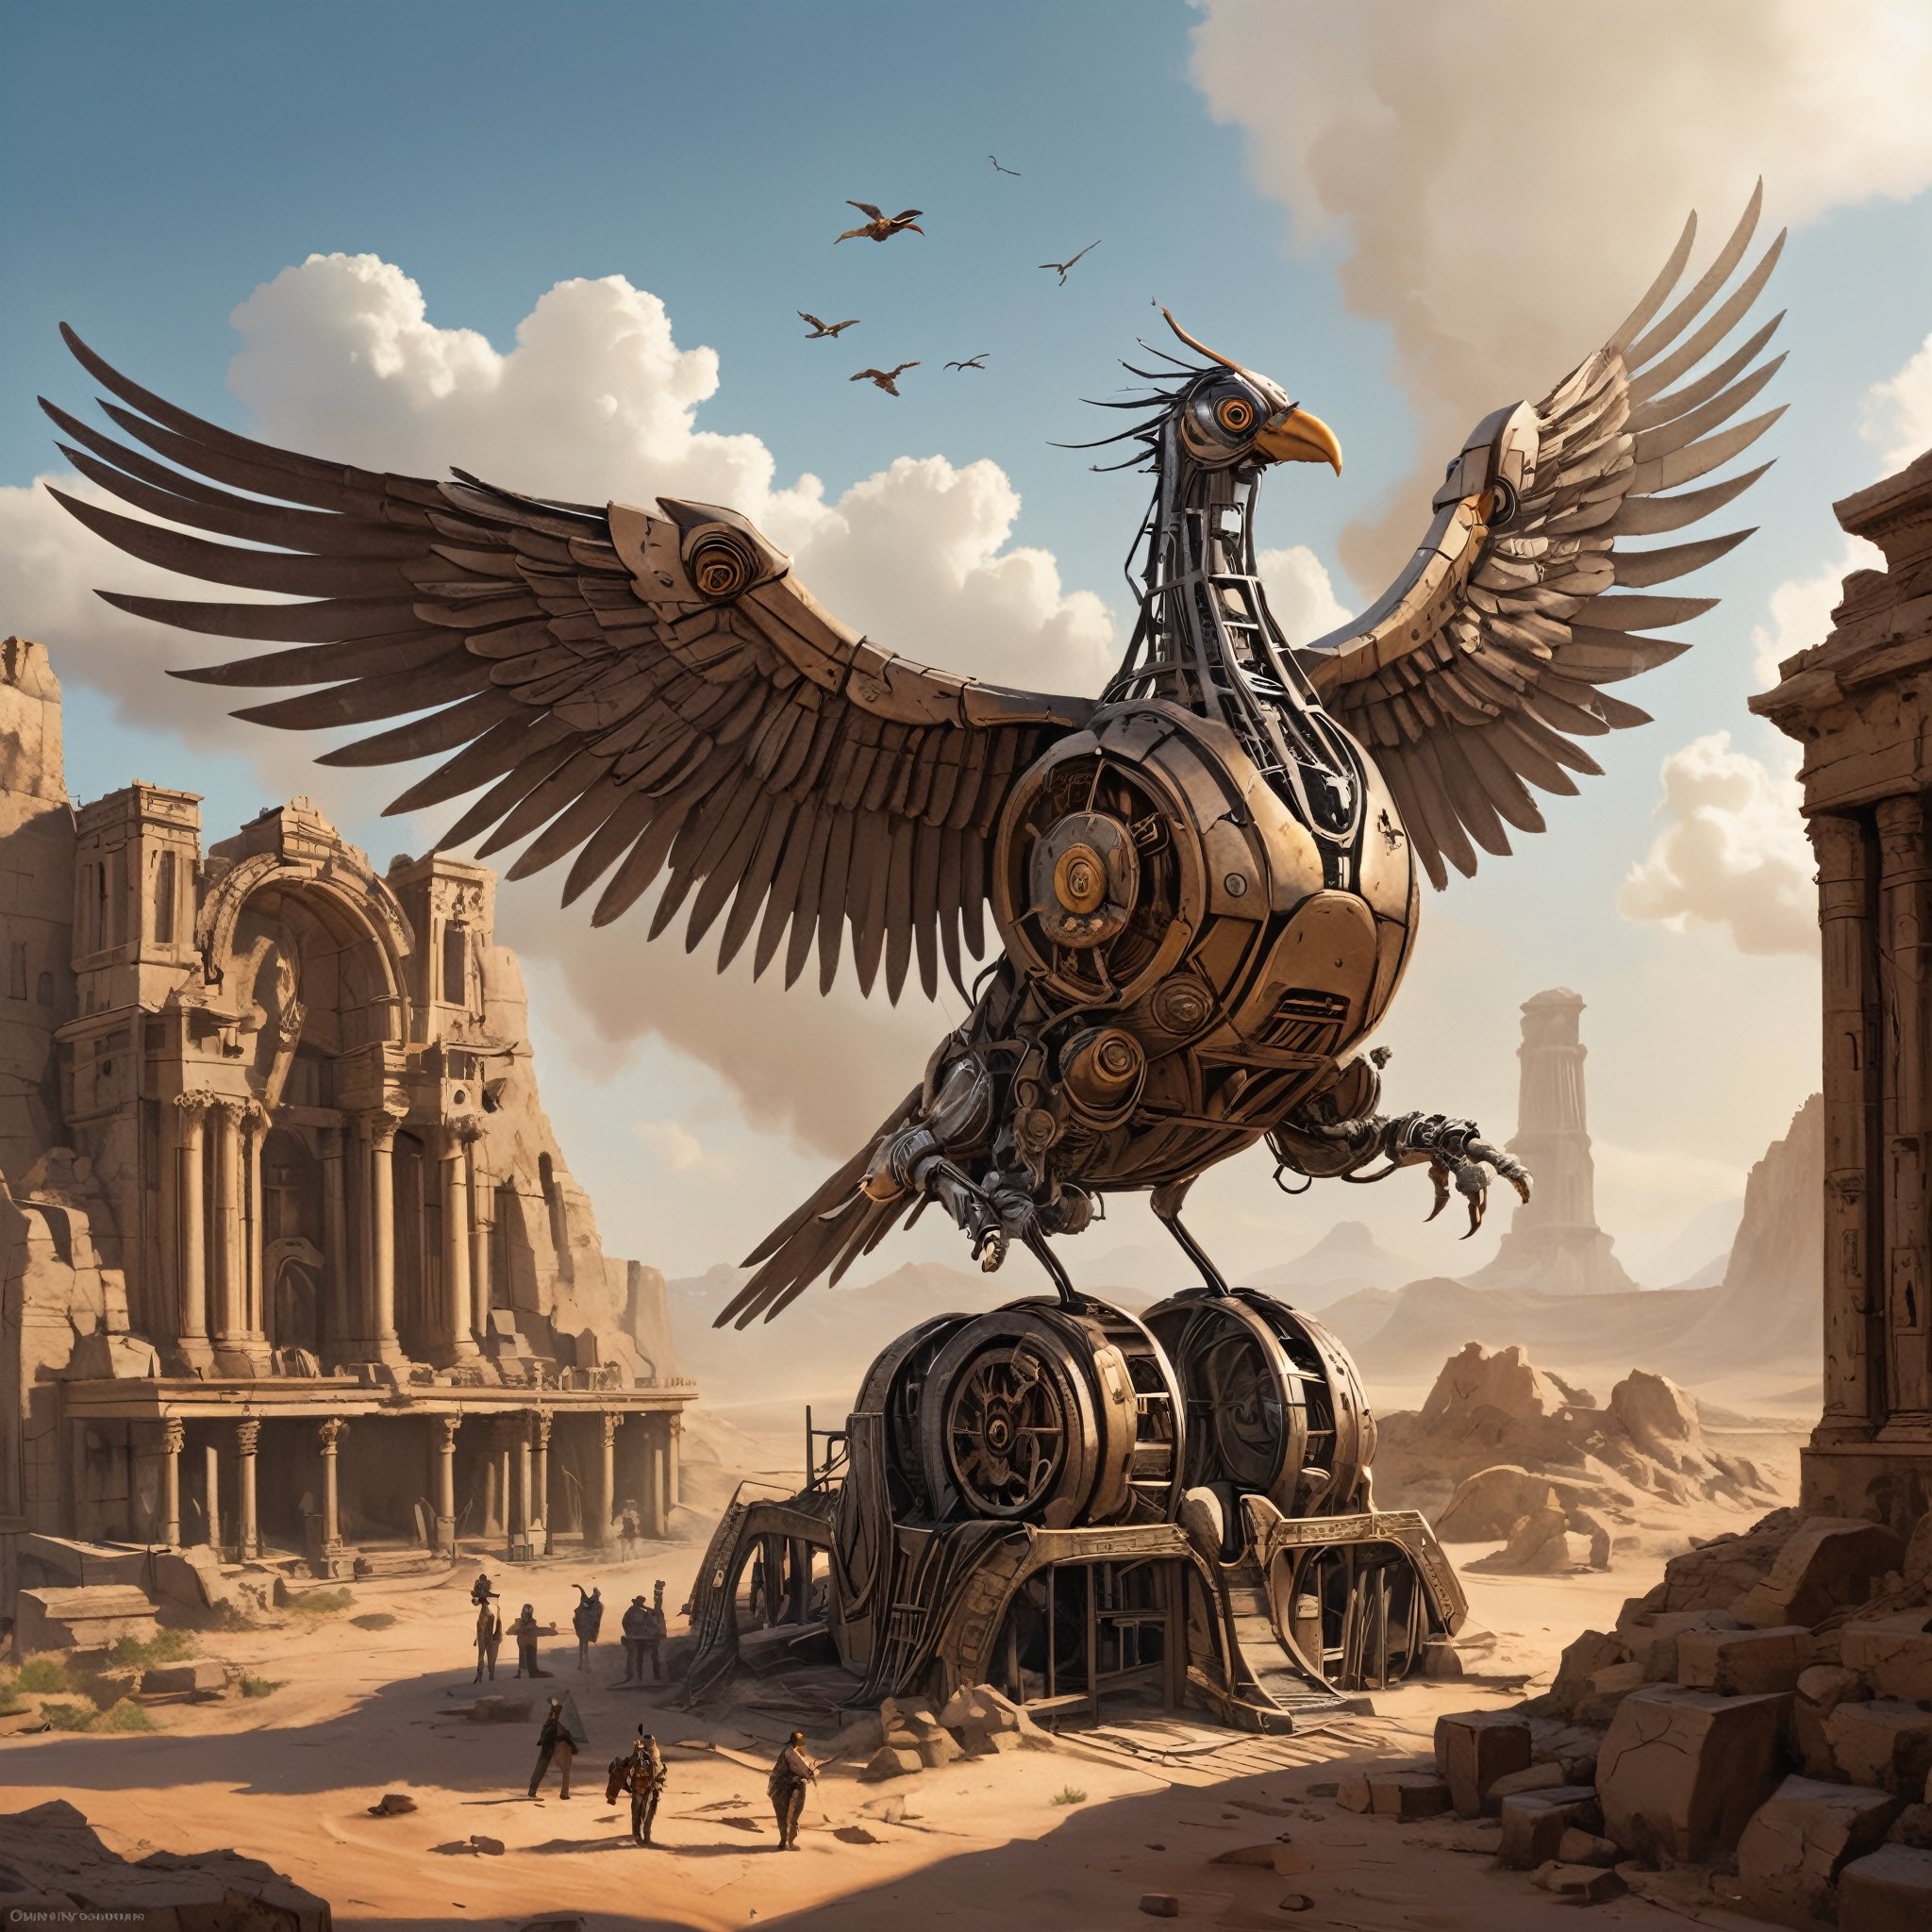 The image depicts a fantastical scene featuring a large mechanical bird with an appearance reminiscent of steampunk design, positioned in the midst of ancient ruins resembling a desert landscape. The mechanical creature is designed with intricate metalwork and boasts large, bird-like wings, as well as wheel appendages that give it the ability to move across the ground. Smoke is emanating from the top of the structure, suggesting that it is powered by some form of steam technology. There are towering structures and ruins in the background, enhancing the otherworldly feel of the environment depicted. The sky is clear with a few birds visible, further emphasizing the theme of flight